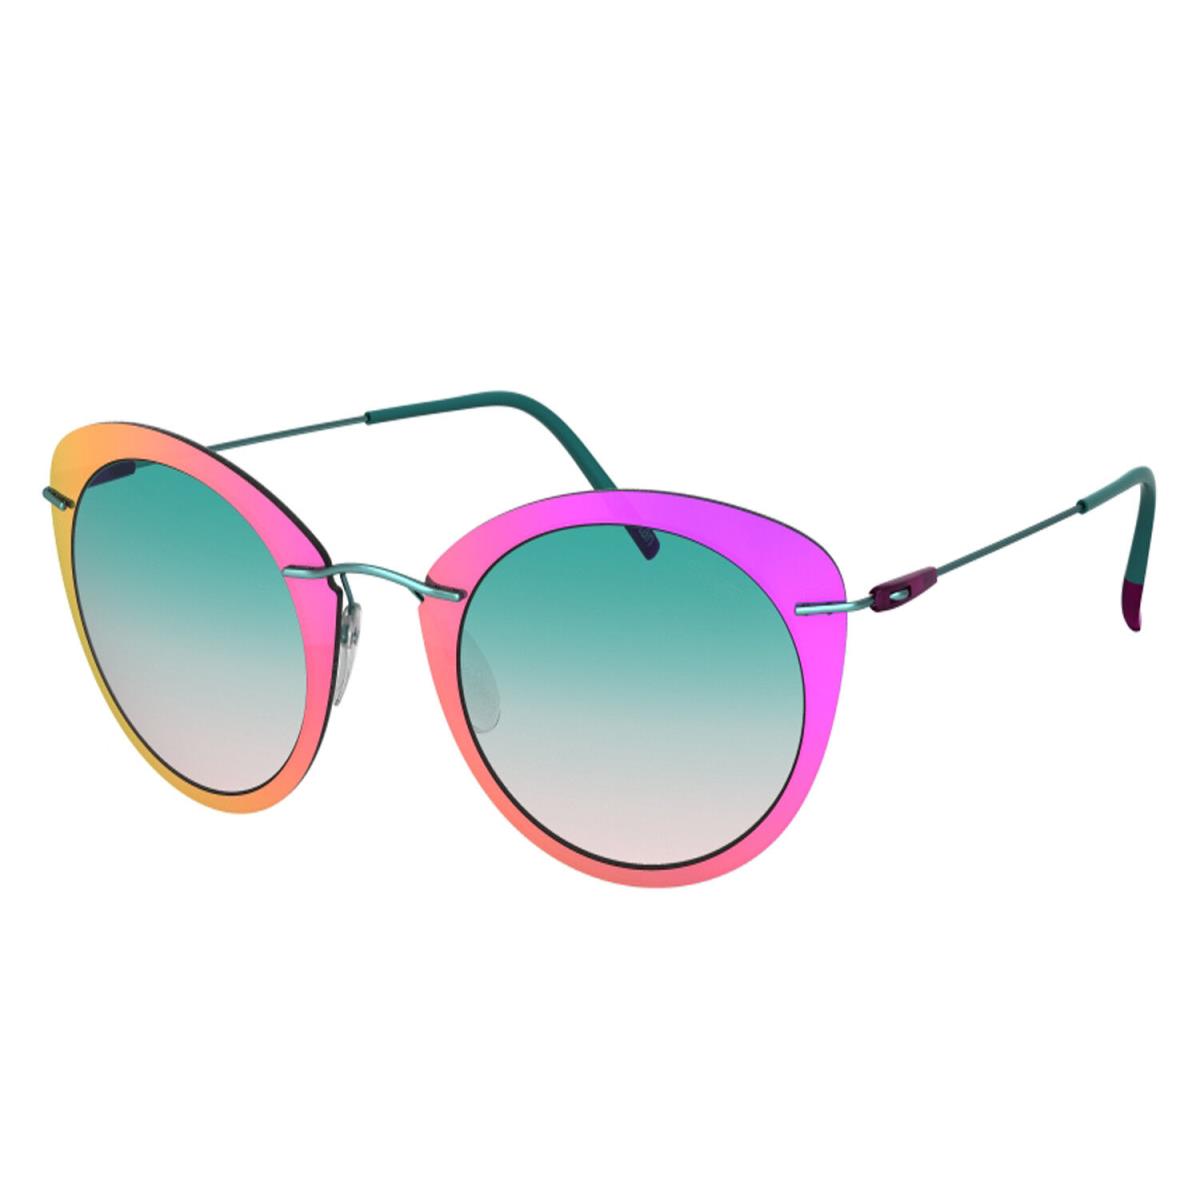 Silhouette Infinity Sunglasses Mint Silky Matte / Teal Rose Grad 8161-75-5040